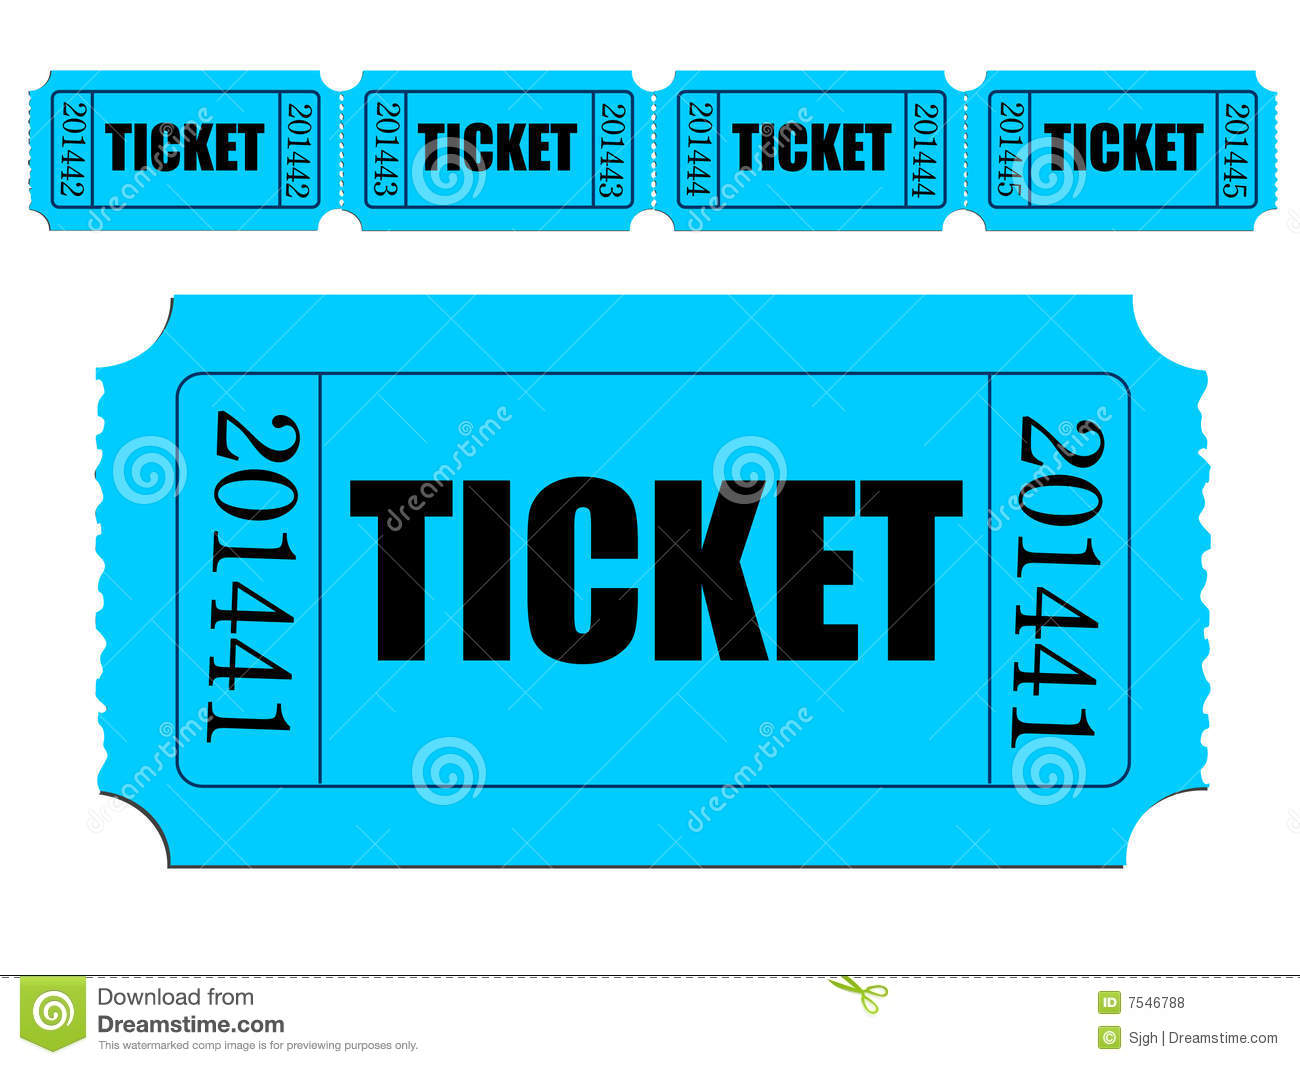 Image Of Single Ticket And Strip Of Tickets Royalty Free Stock Photos    